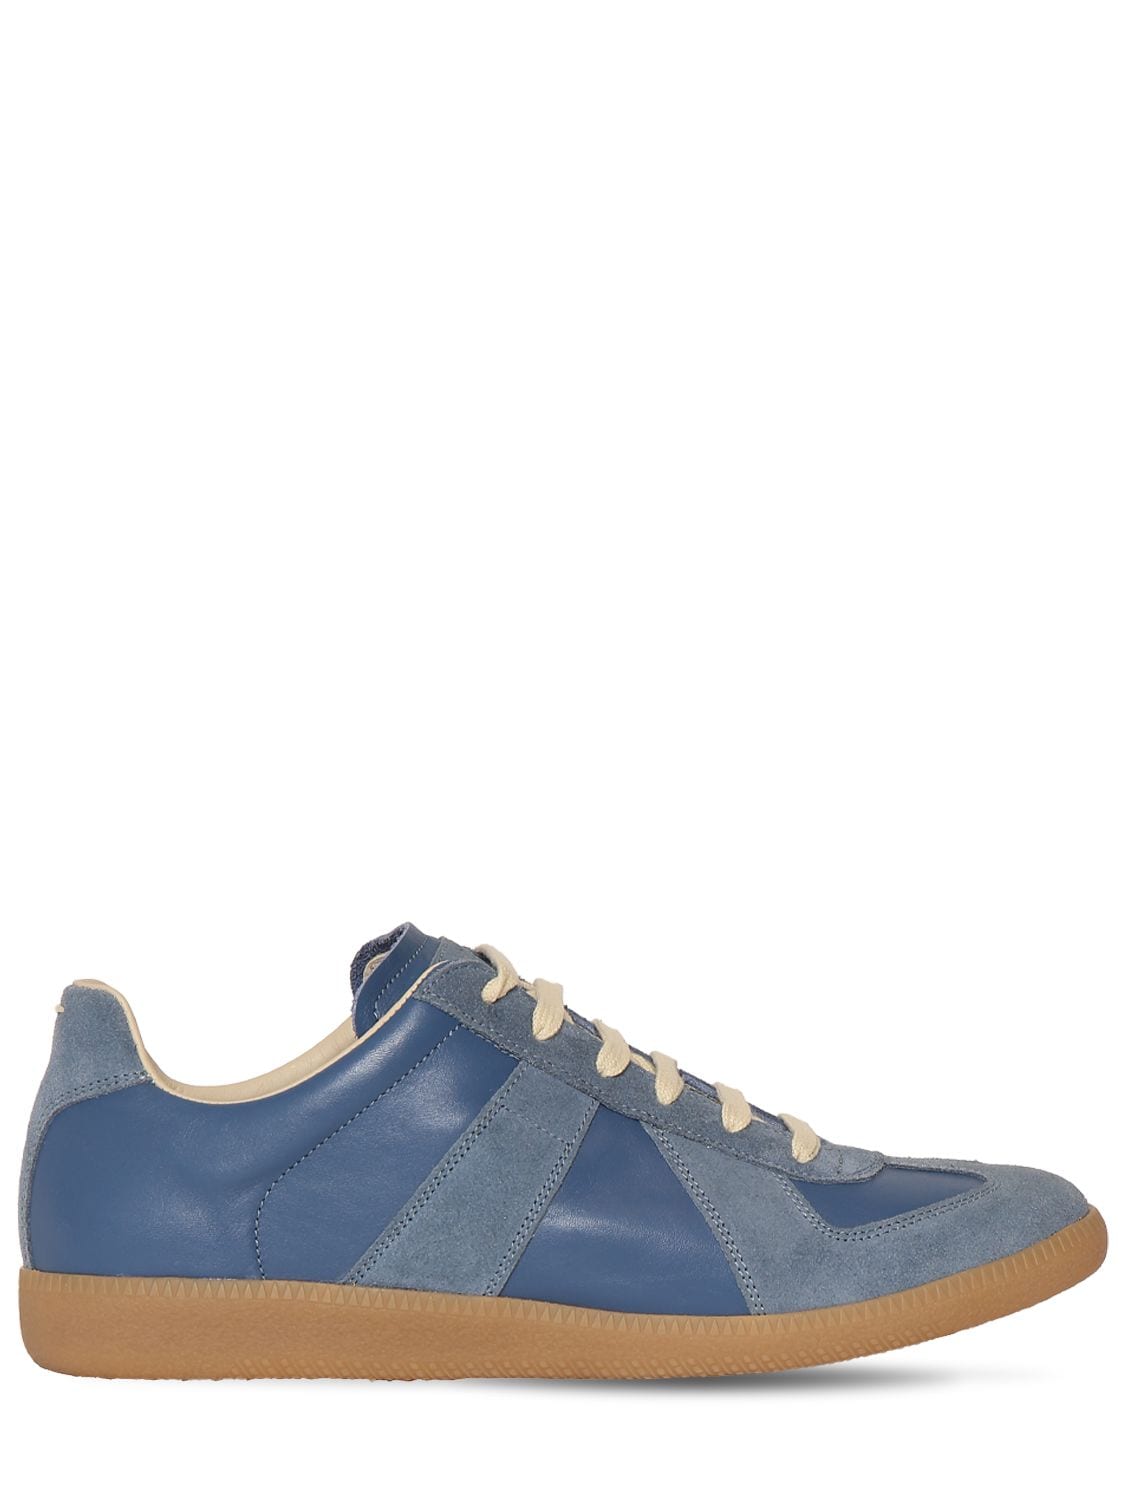 MAISON MARGIELA 20mm Replica Leather & Suede Sneakers